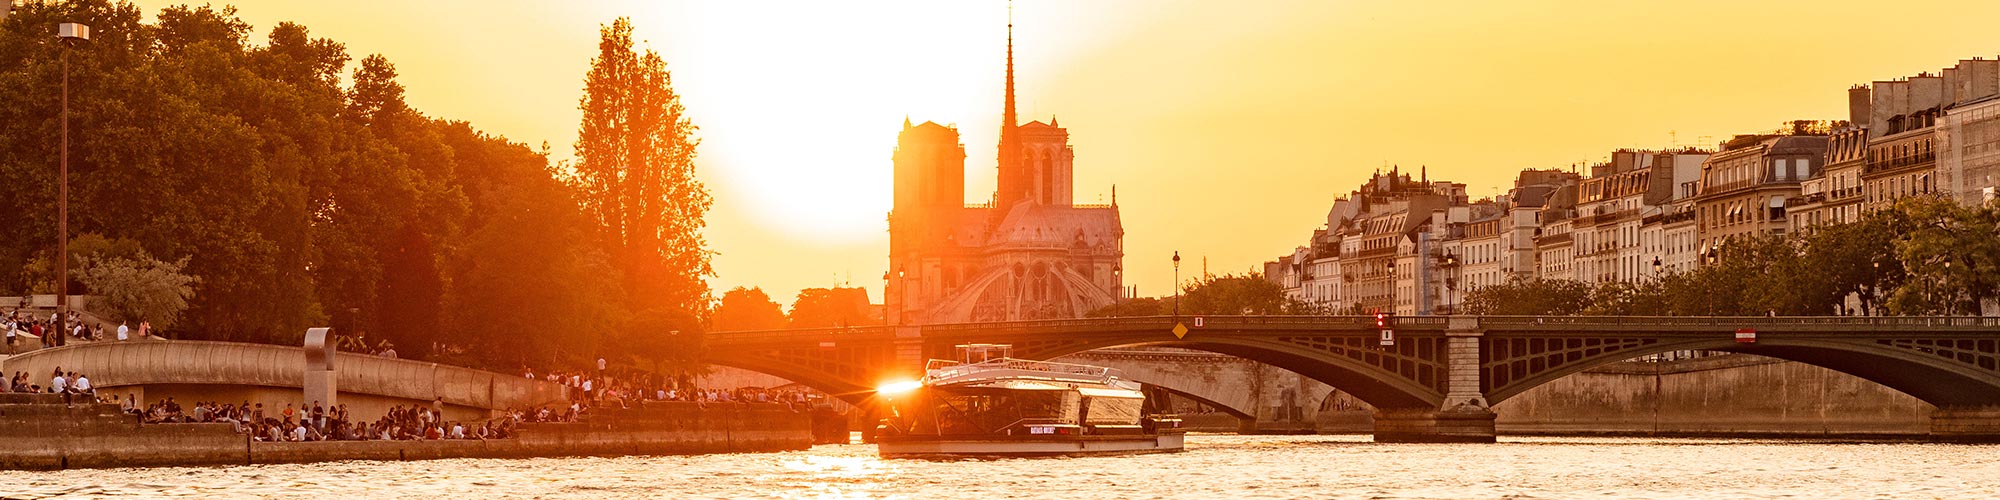 Cruise on the Seine with Bateaux Mouches